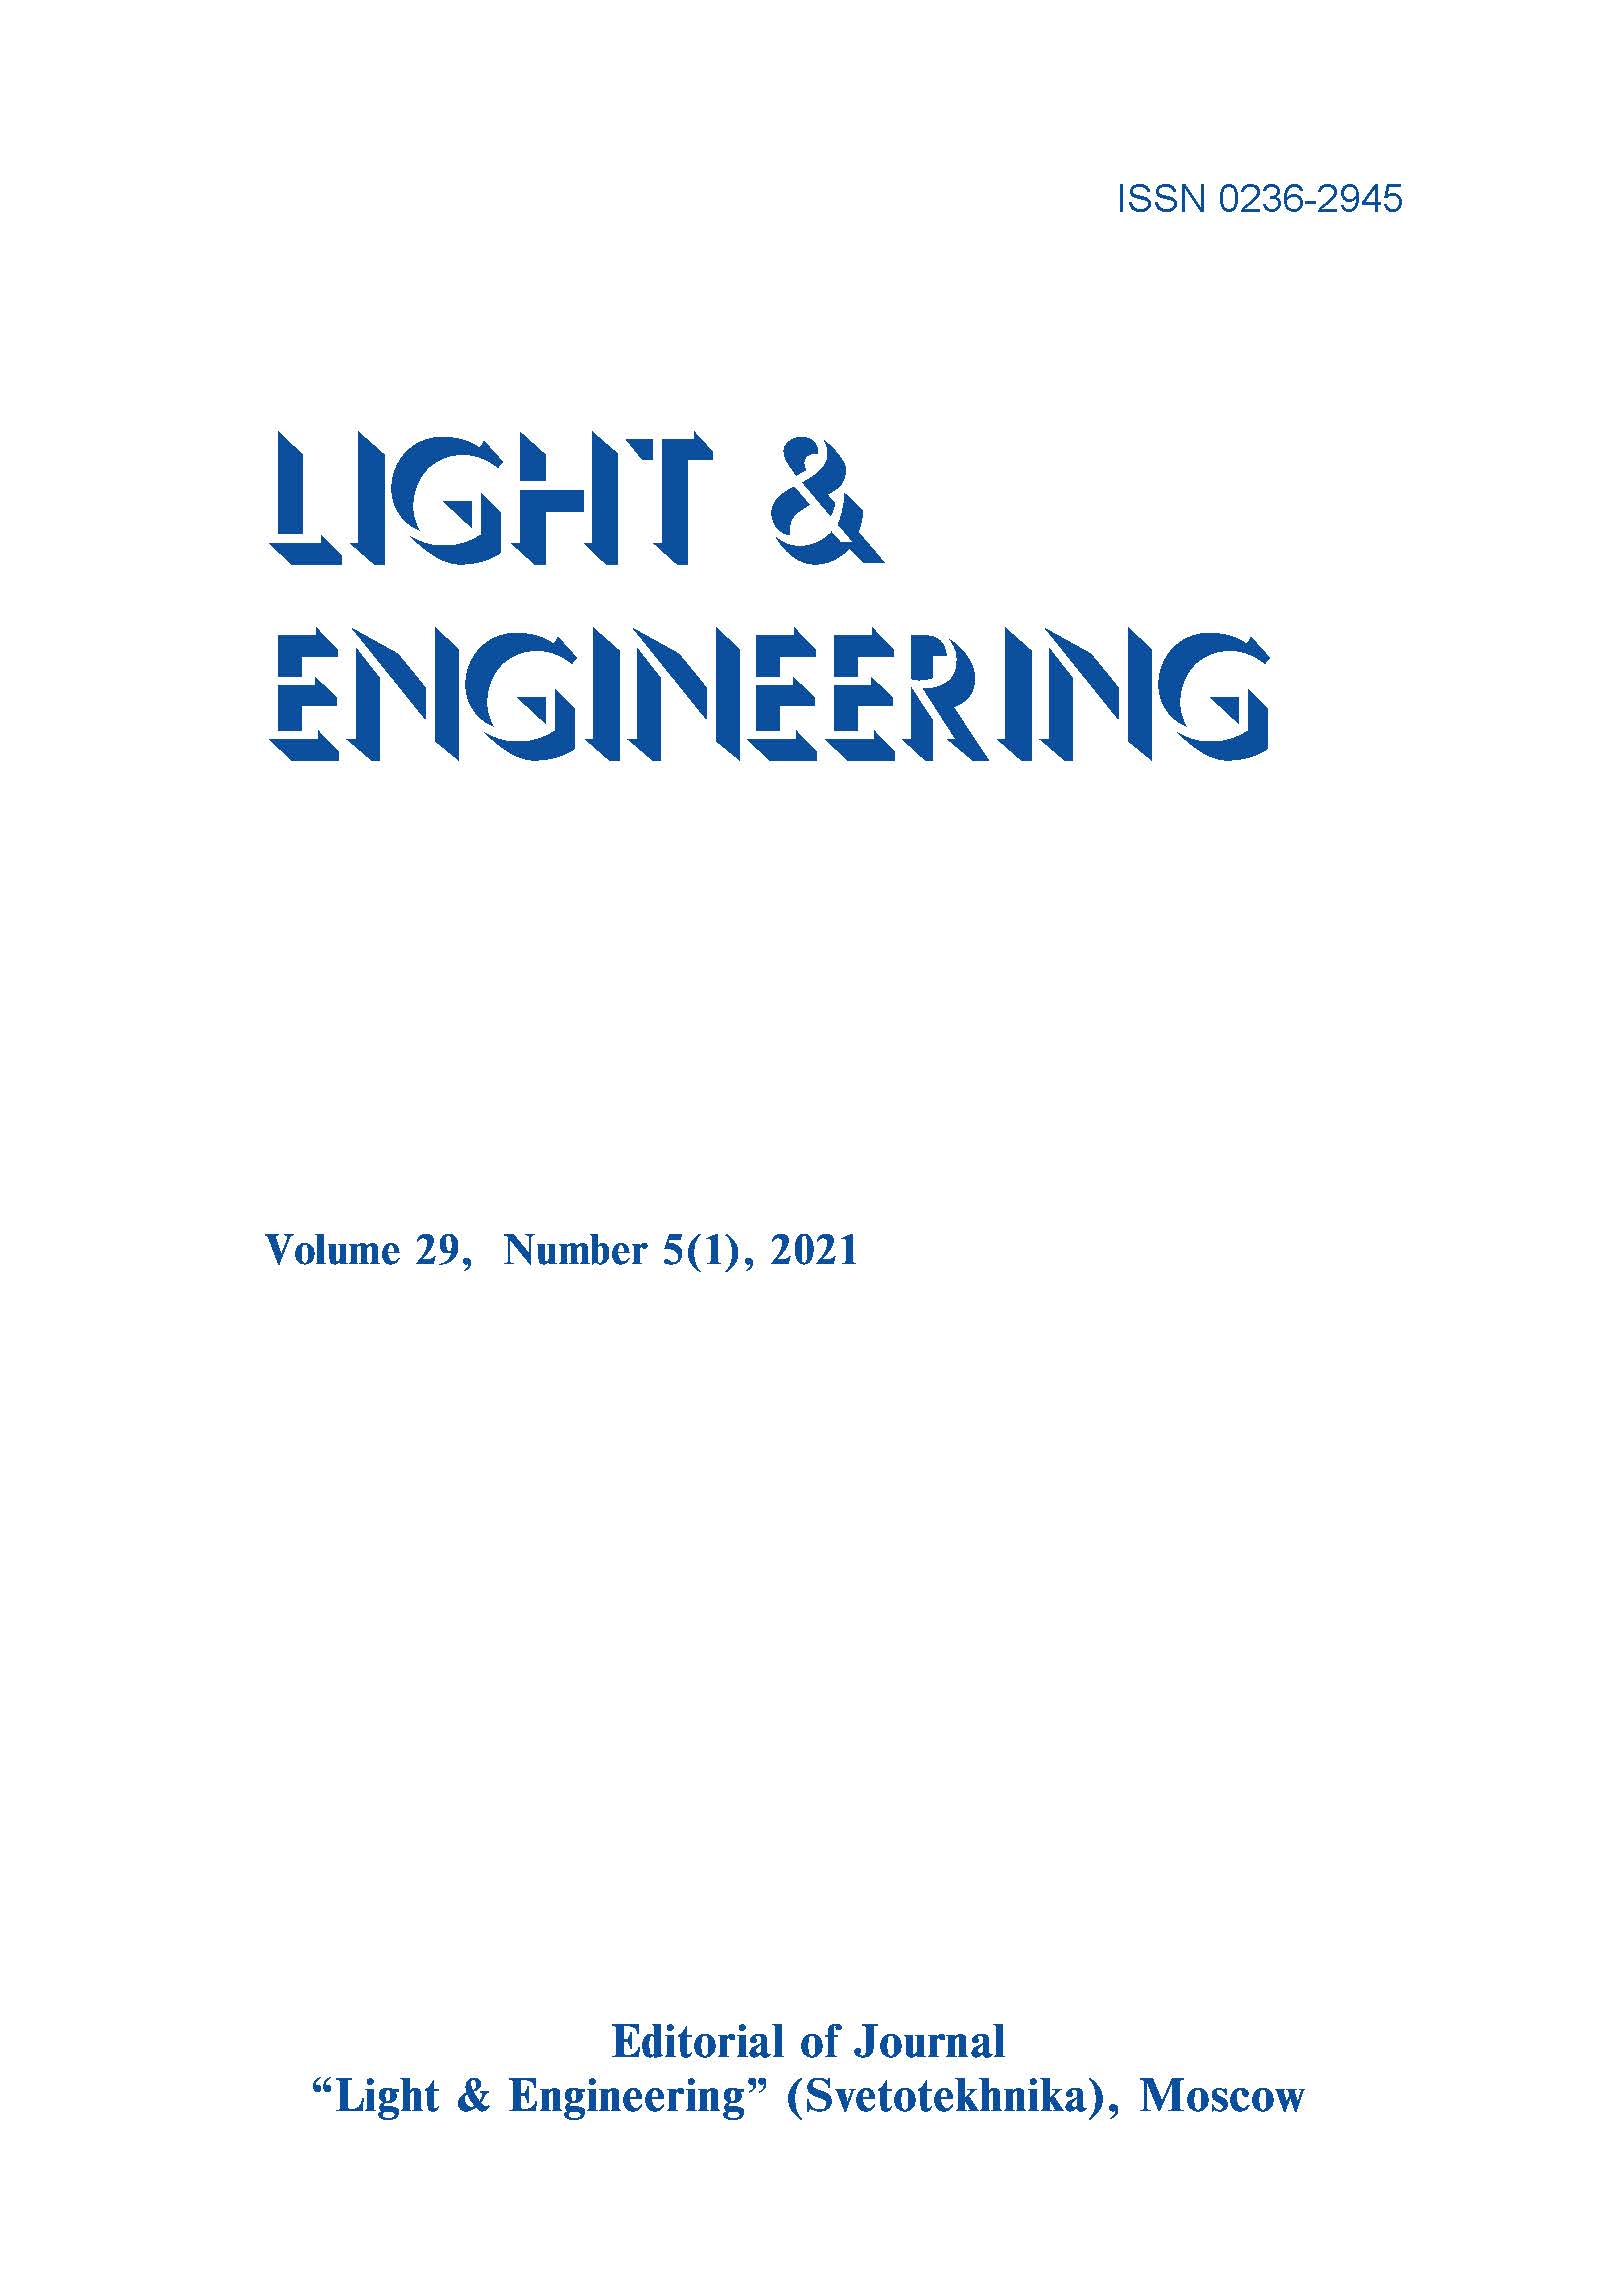 Holographic Optical Elements: Advantages and Disadvantages for Efficient Lighting, Sun Protection, and Photovoltaic Power Supply of Buildings L&E, Vol. 29, No. 5 (1), 2021